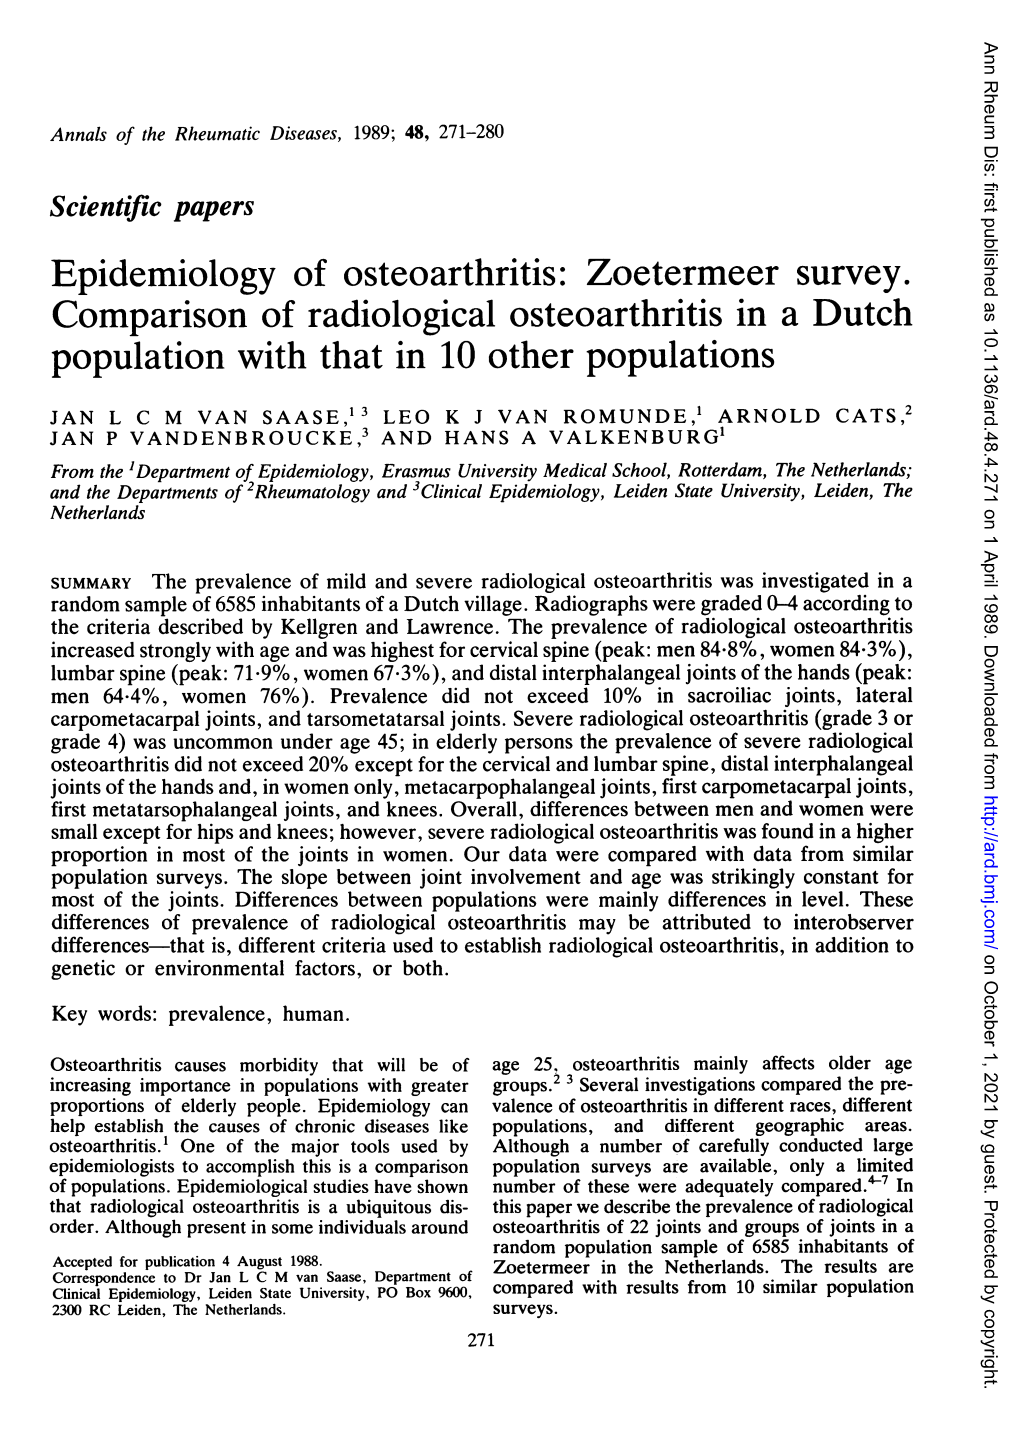 Zoetermeer Survey. Comparison of Radiological Osteoarthritis in a Dutch Population with That in 10 Other Populations